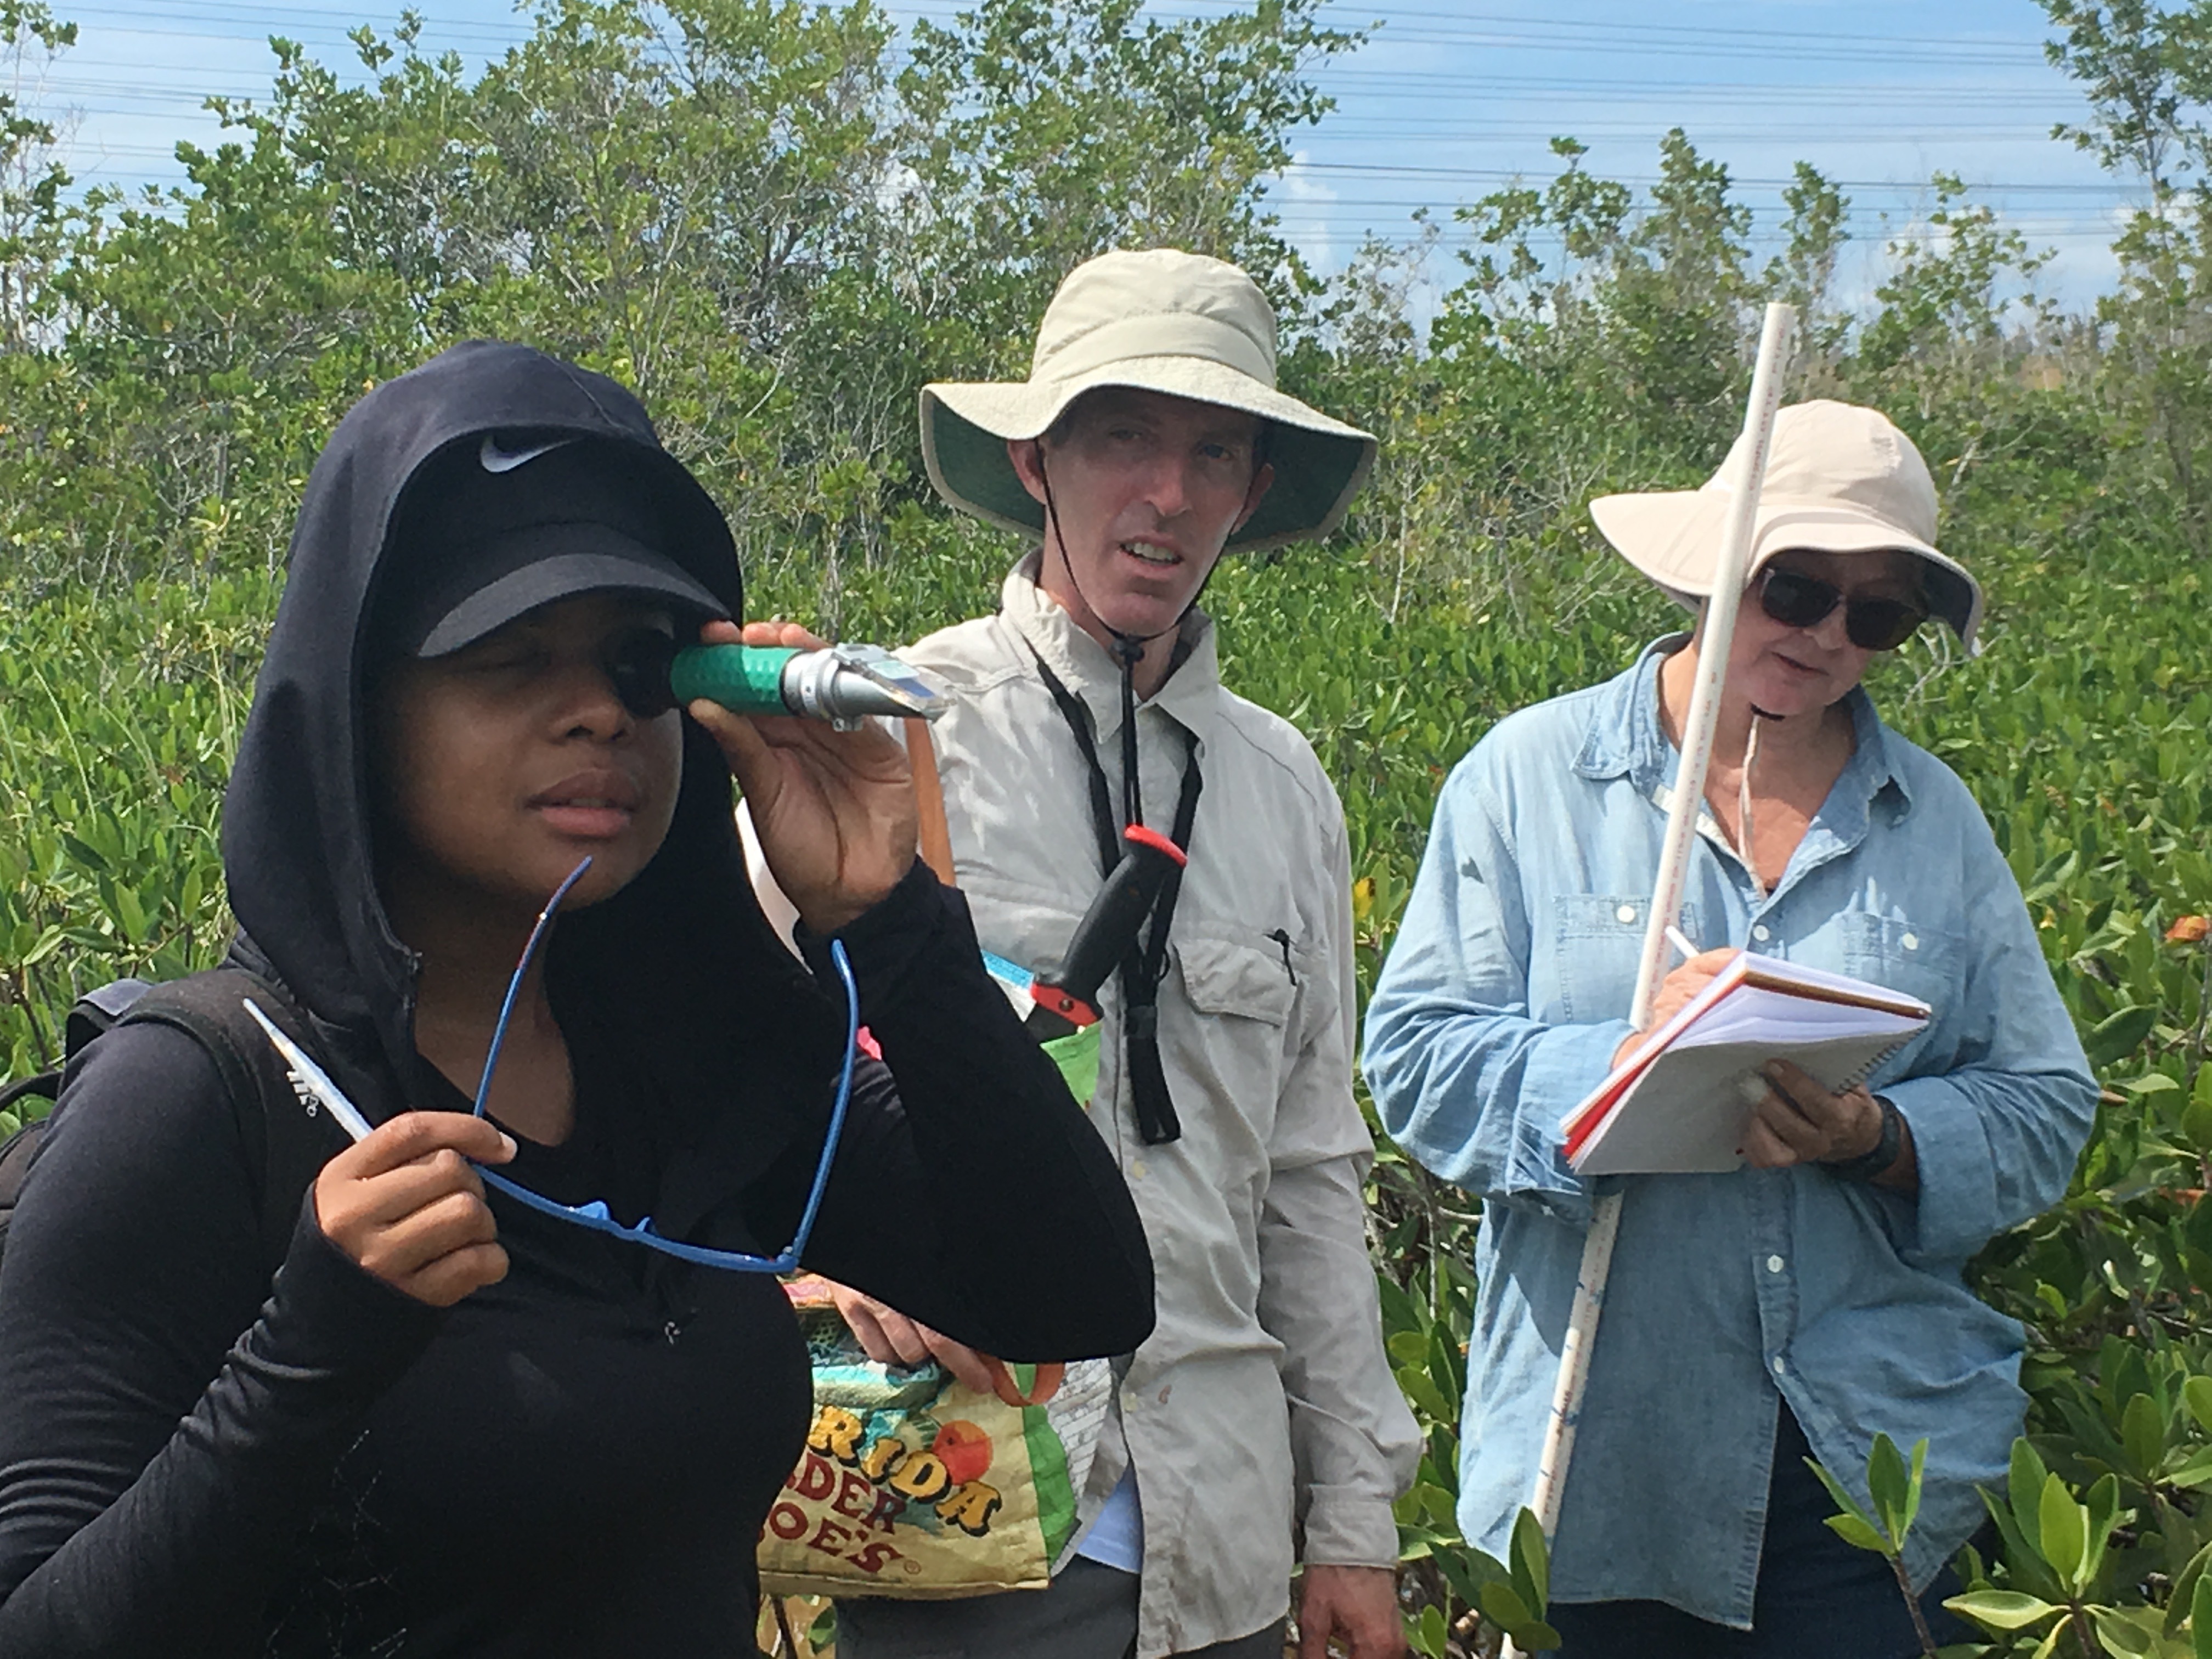 Priscilla Brown (FIU Teach Undergraduate, left foreground) using a salinity meter to measure salinity in Biscayne National Park.